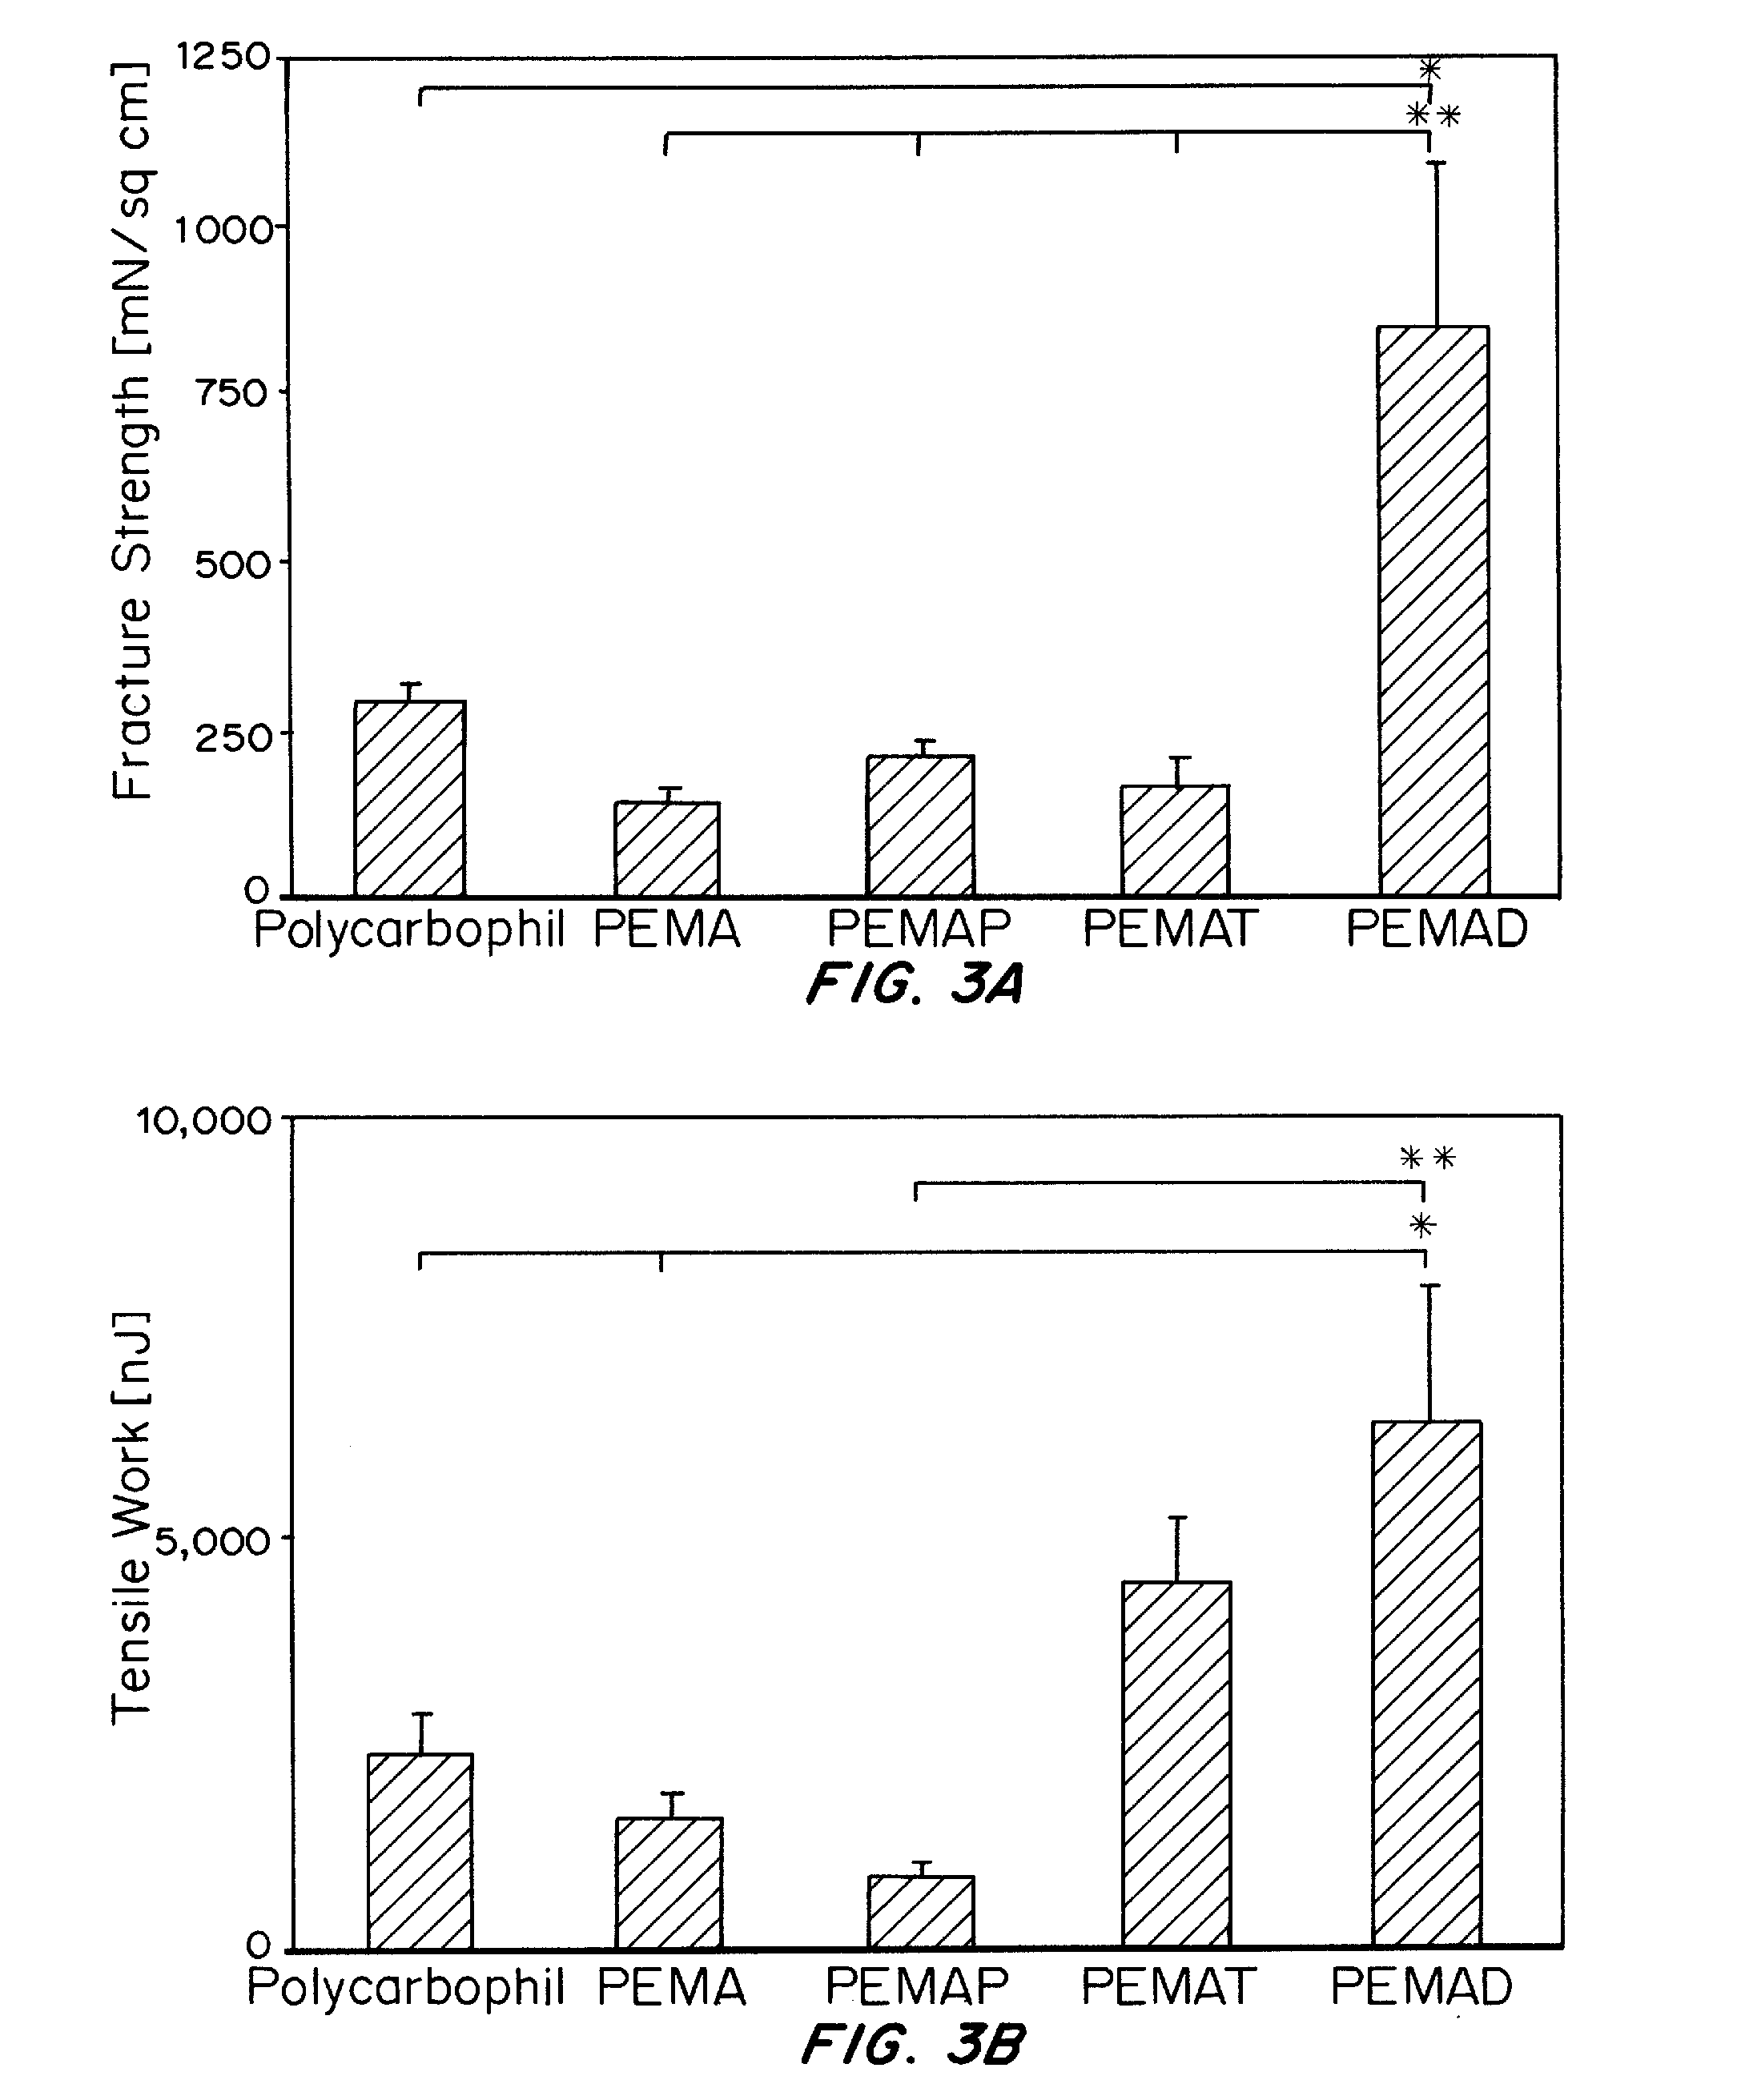 Nanoparticle compositions and methods for improved oral delivery of active agents